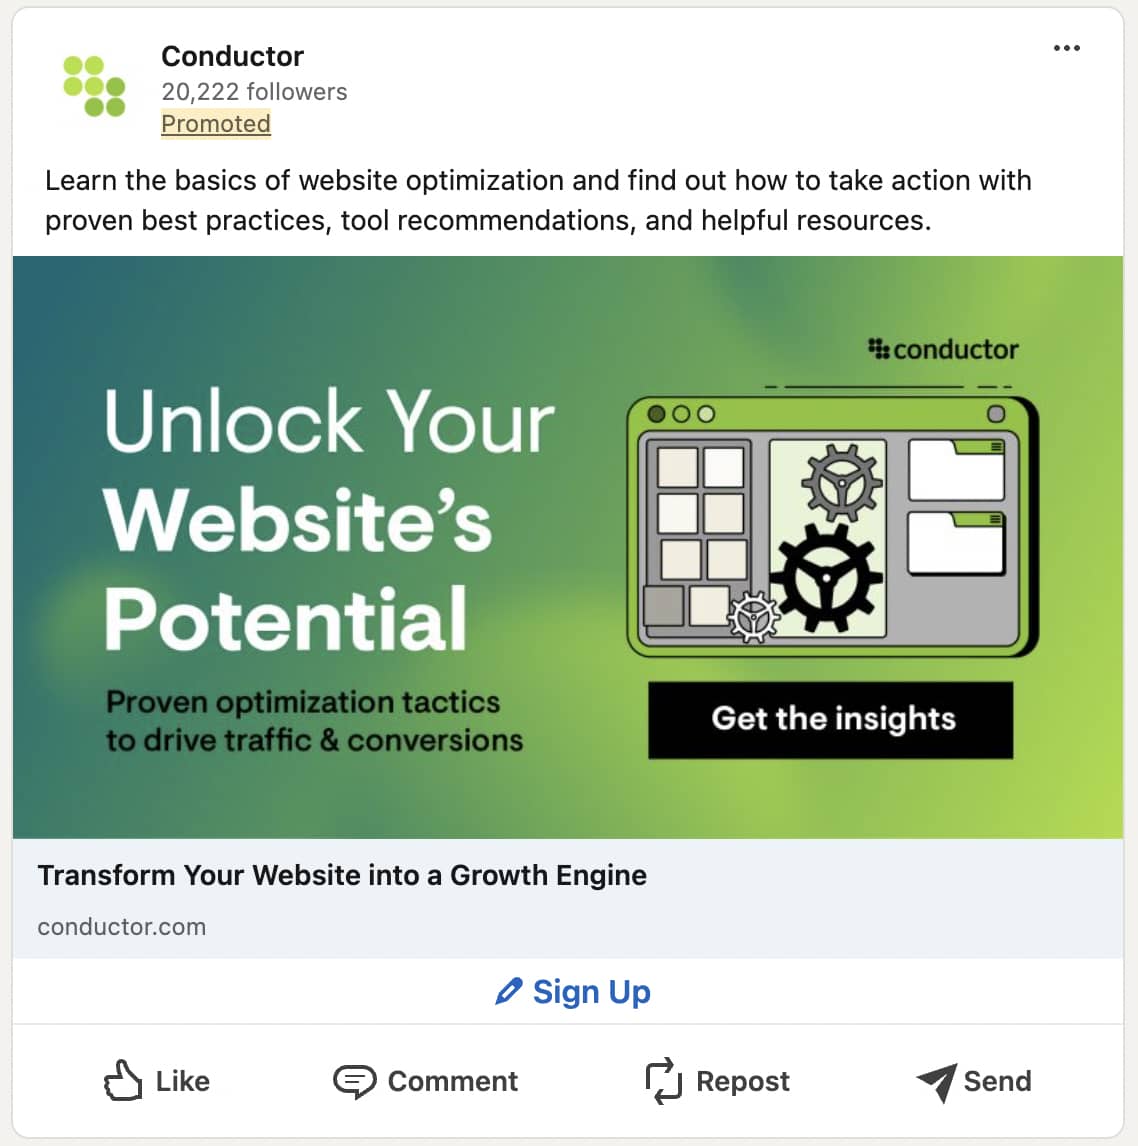 Promoted Content through LinkedIn Ads Example